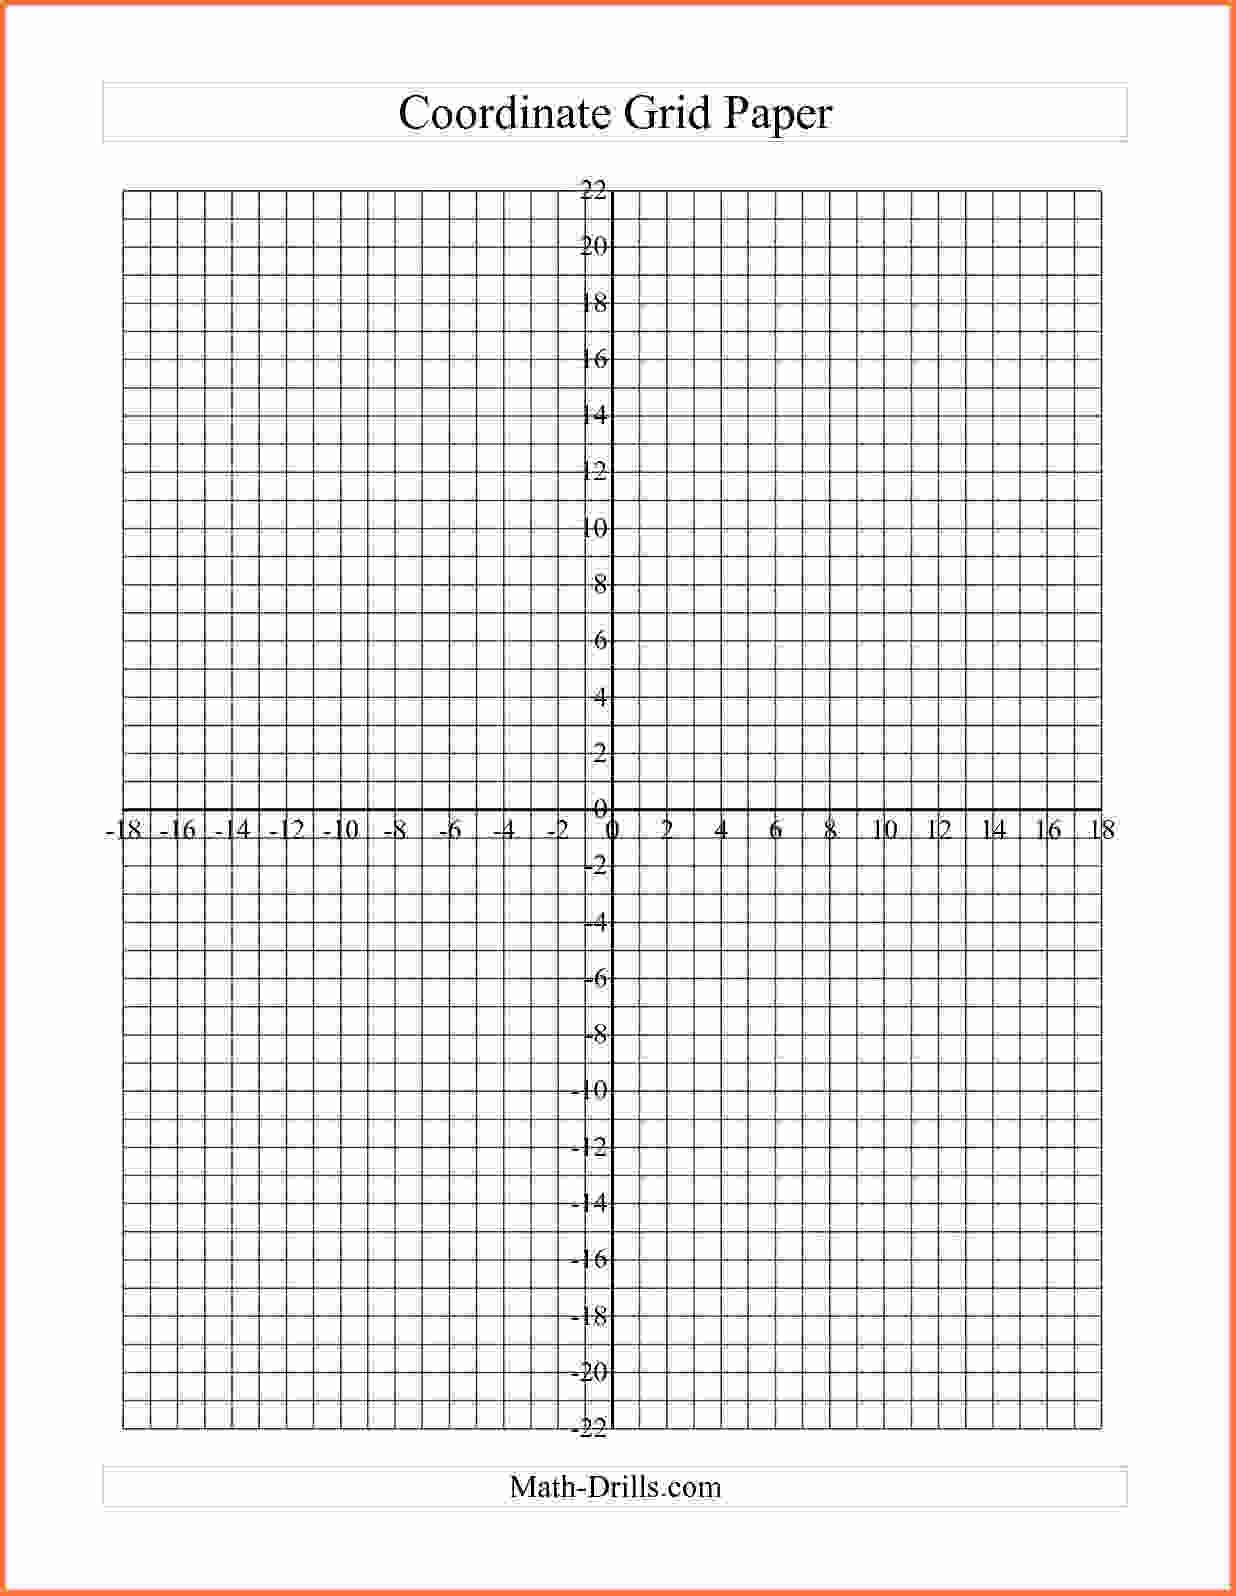 Image Result For Free Printable Cartesian Coordinates Paper 8X11 